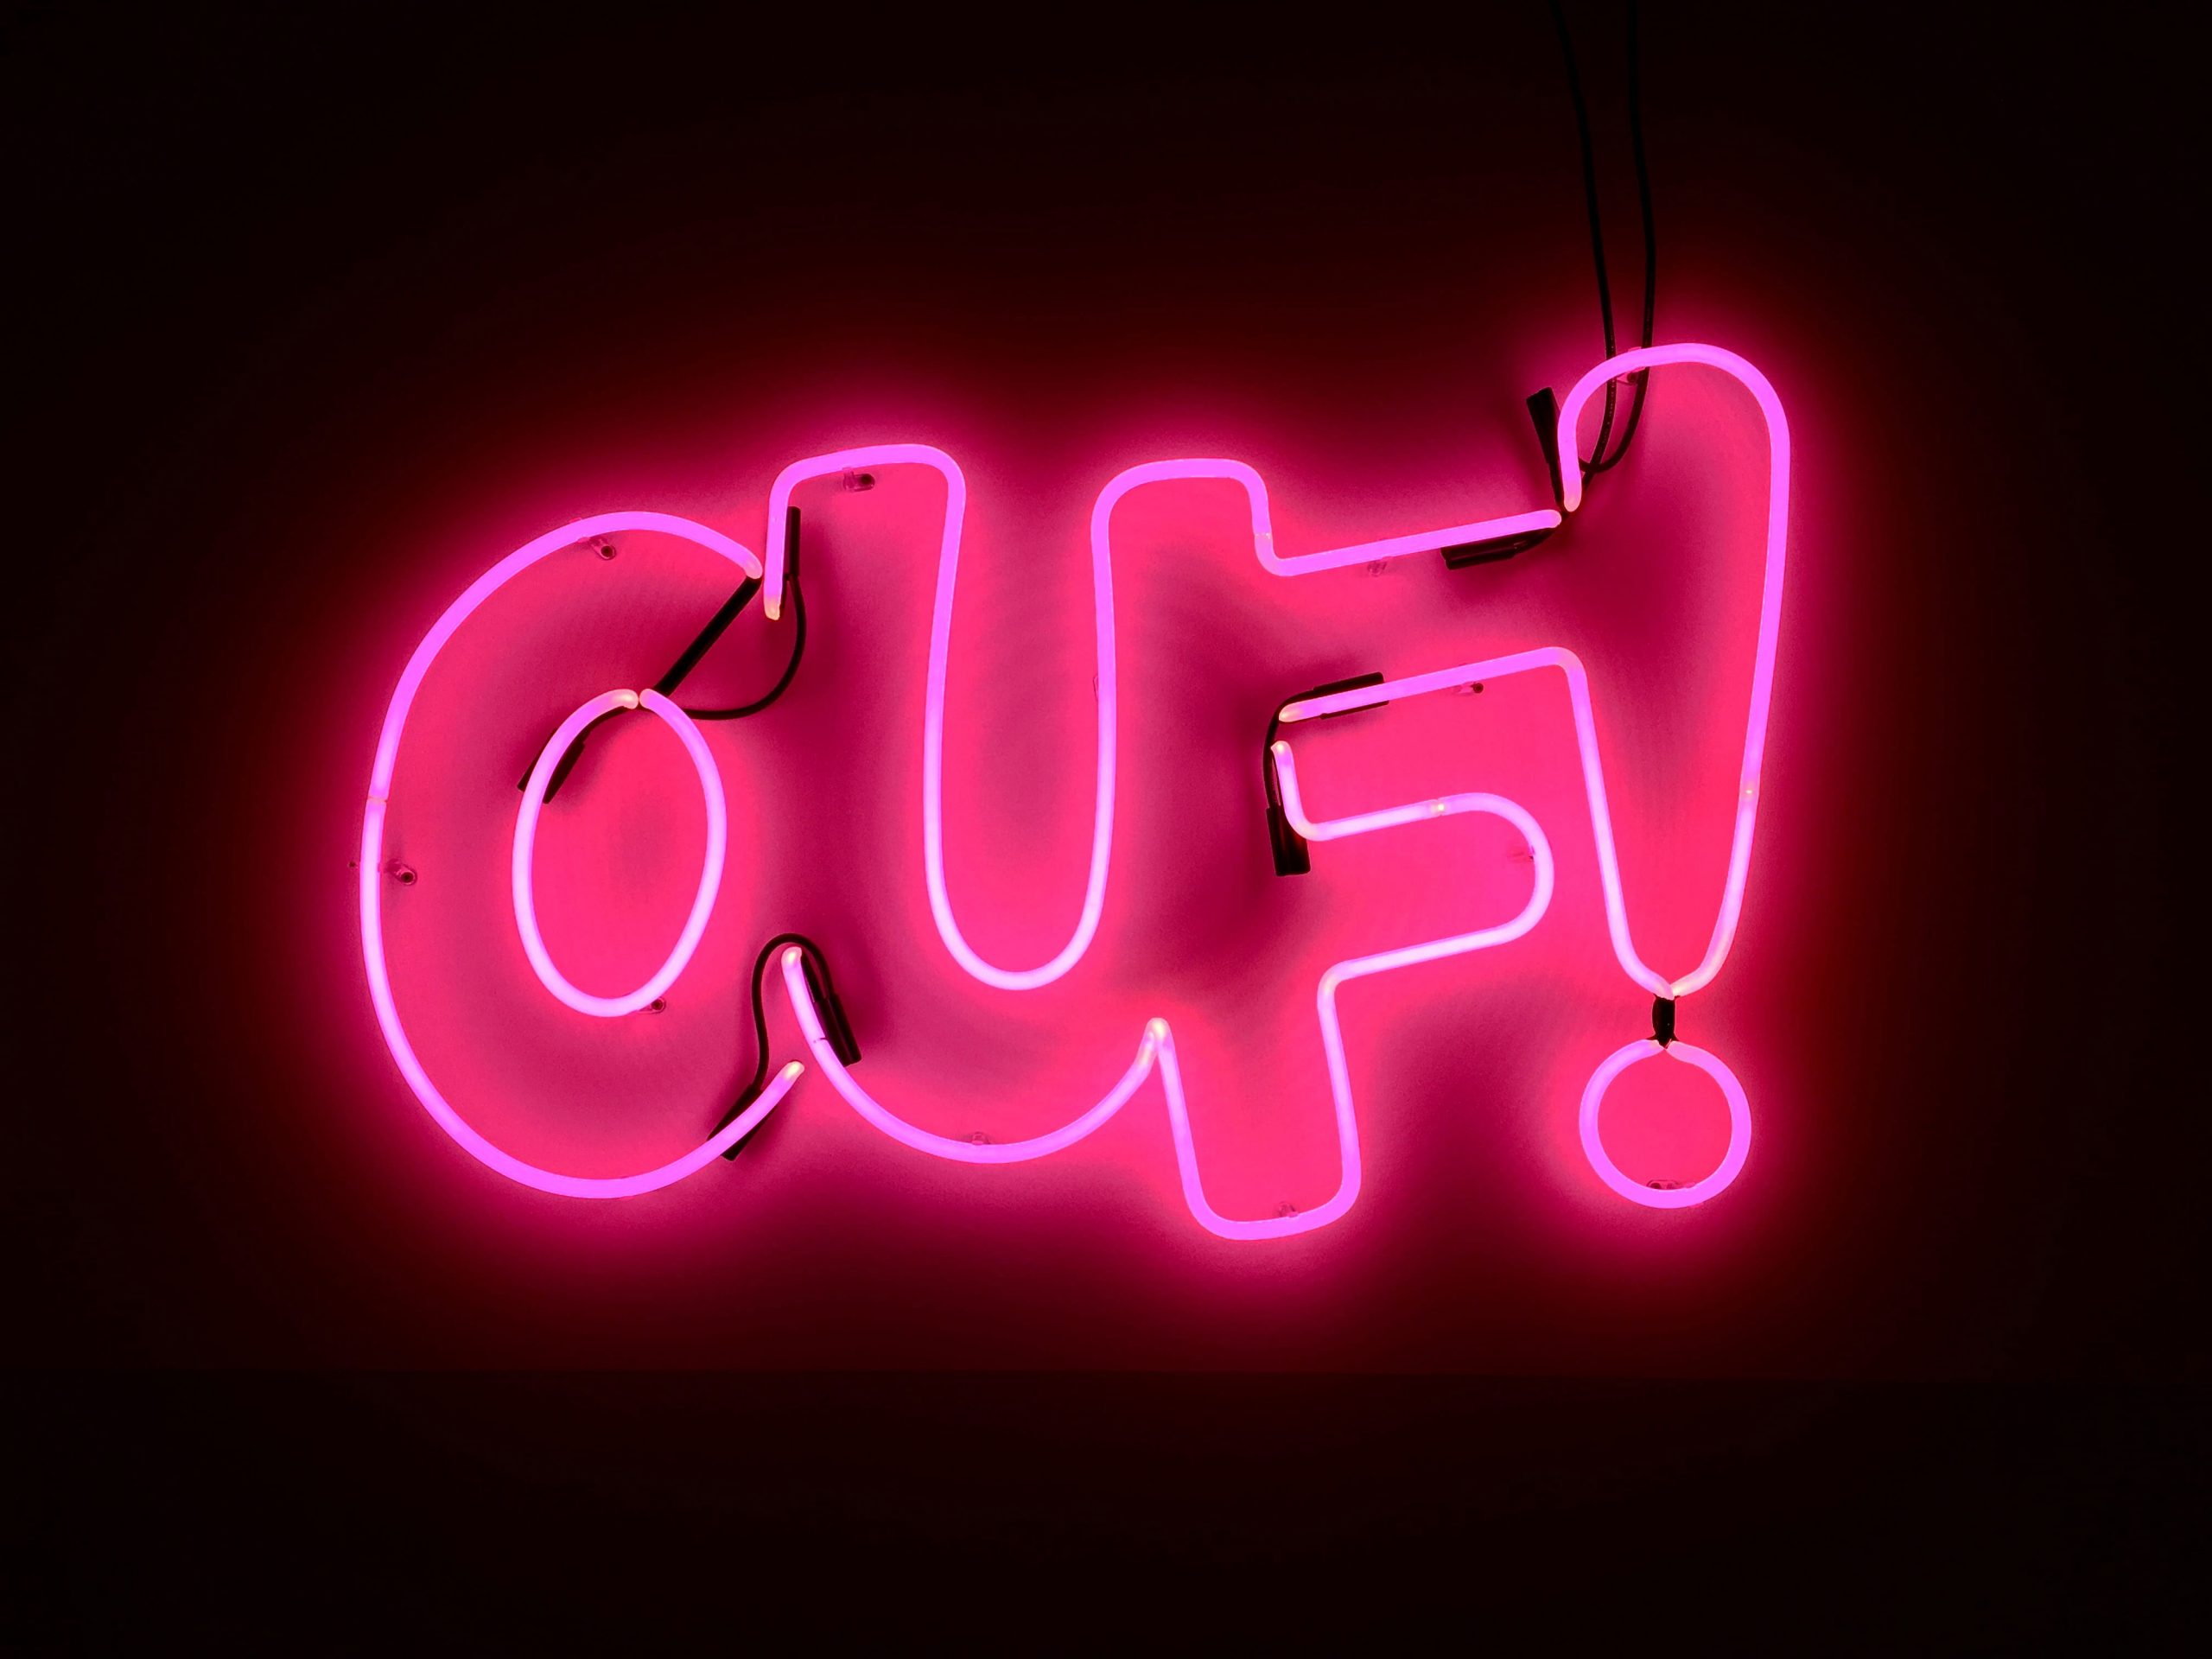 Ouf light signage wallpaper, OUF! neon light signage, neon sign, wallpaper